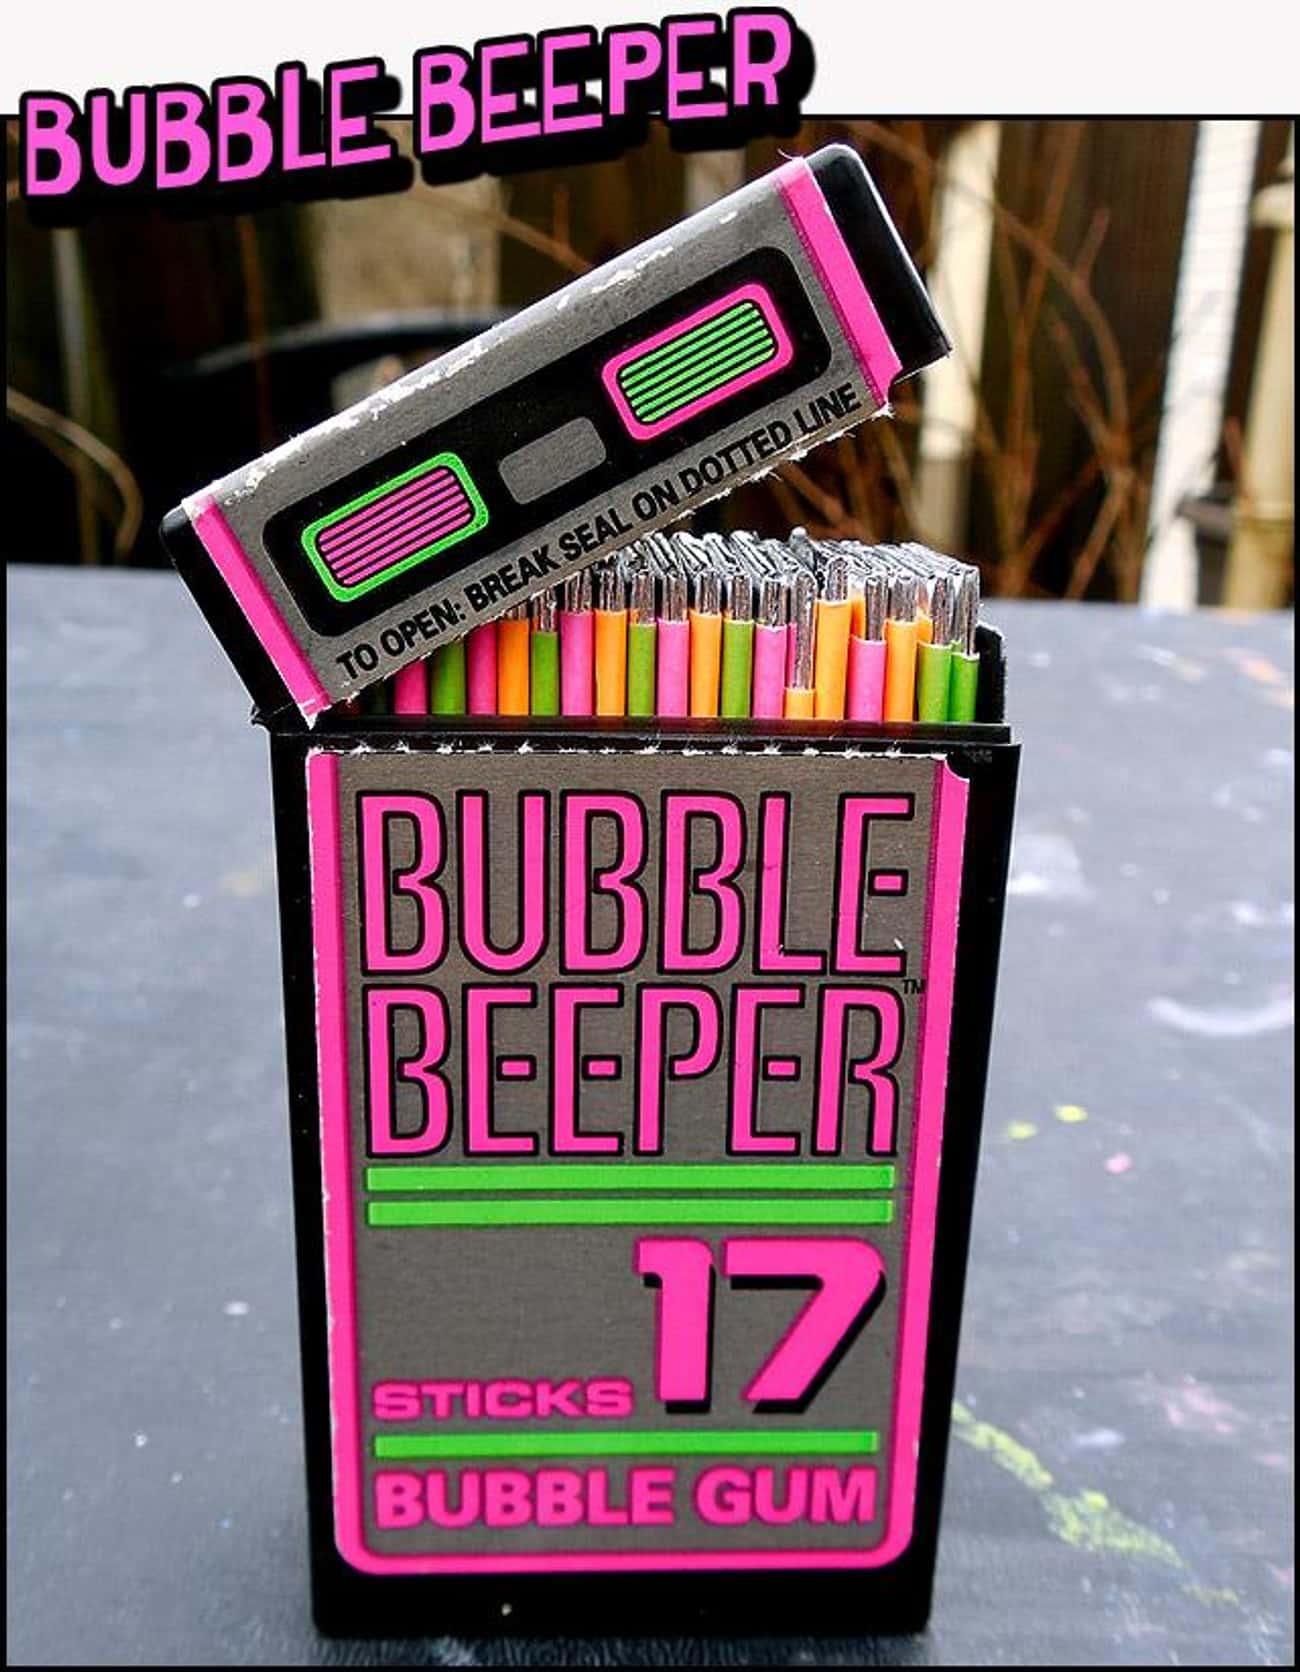 The Bubble Beeper